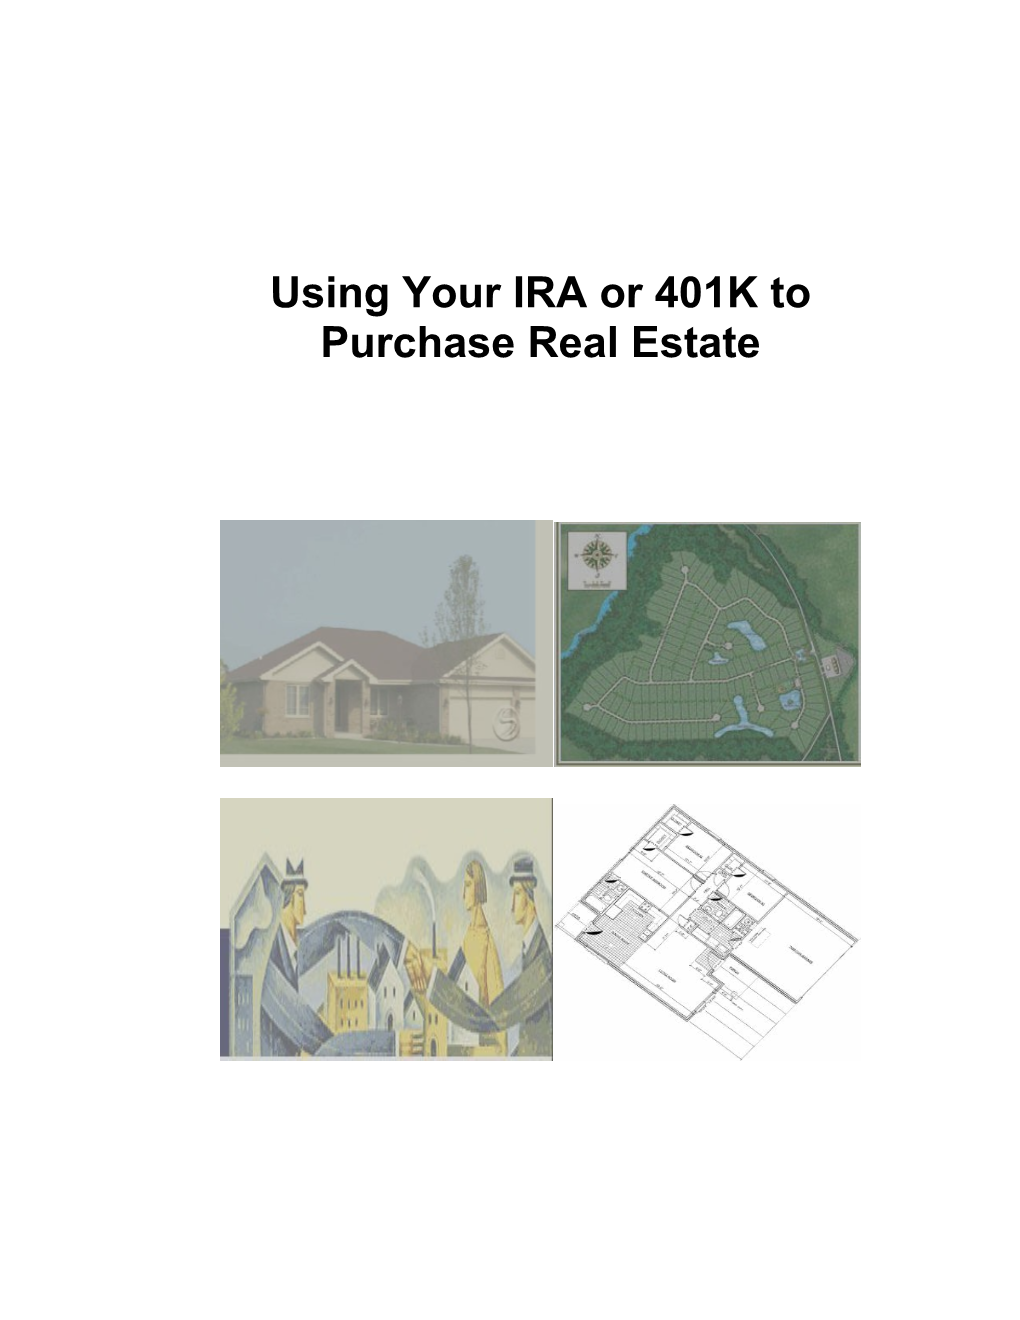 Using Your IRA Or 401 K to Purchase Real Estate